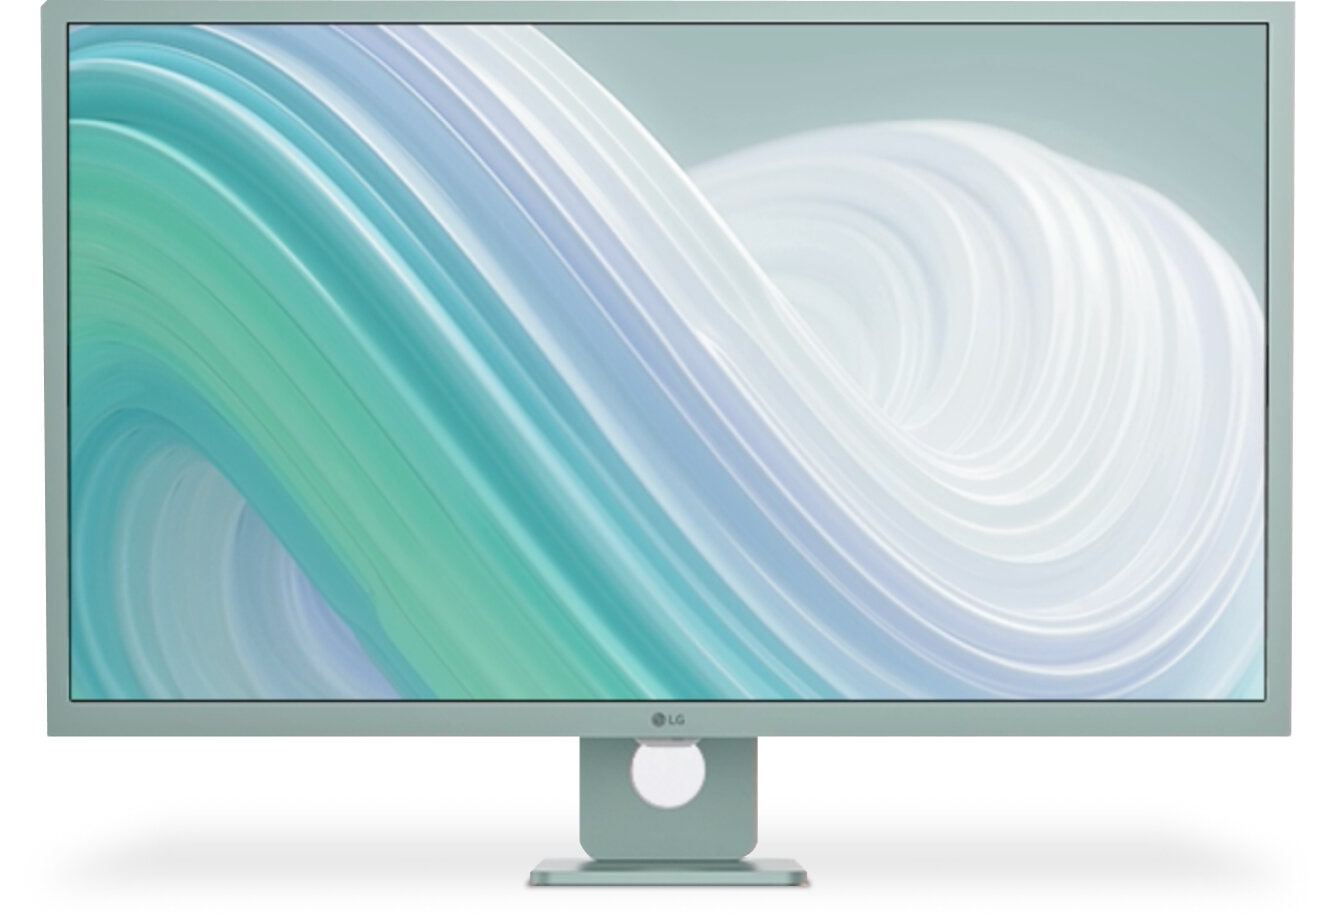 The LG MyView Smart Monitor cycles between a white, pink, olive and black exterior, showing style that fits any space.